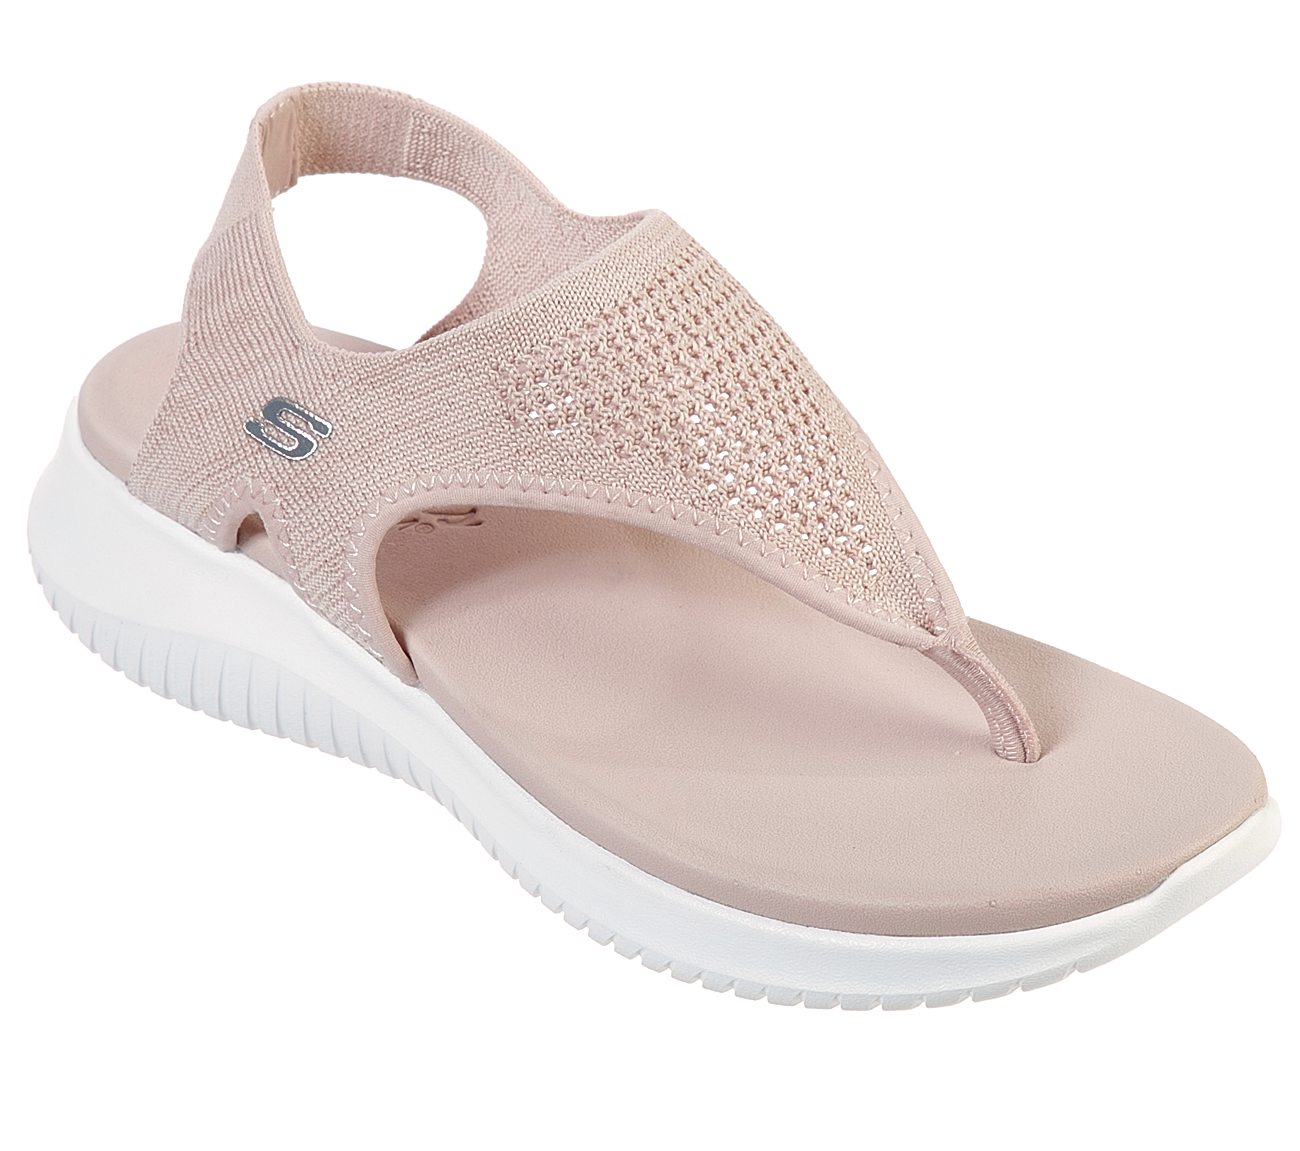 ULTRA FLEX - SPRING MOTION, BLUSH Footwear Lateral View